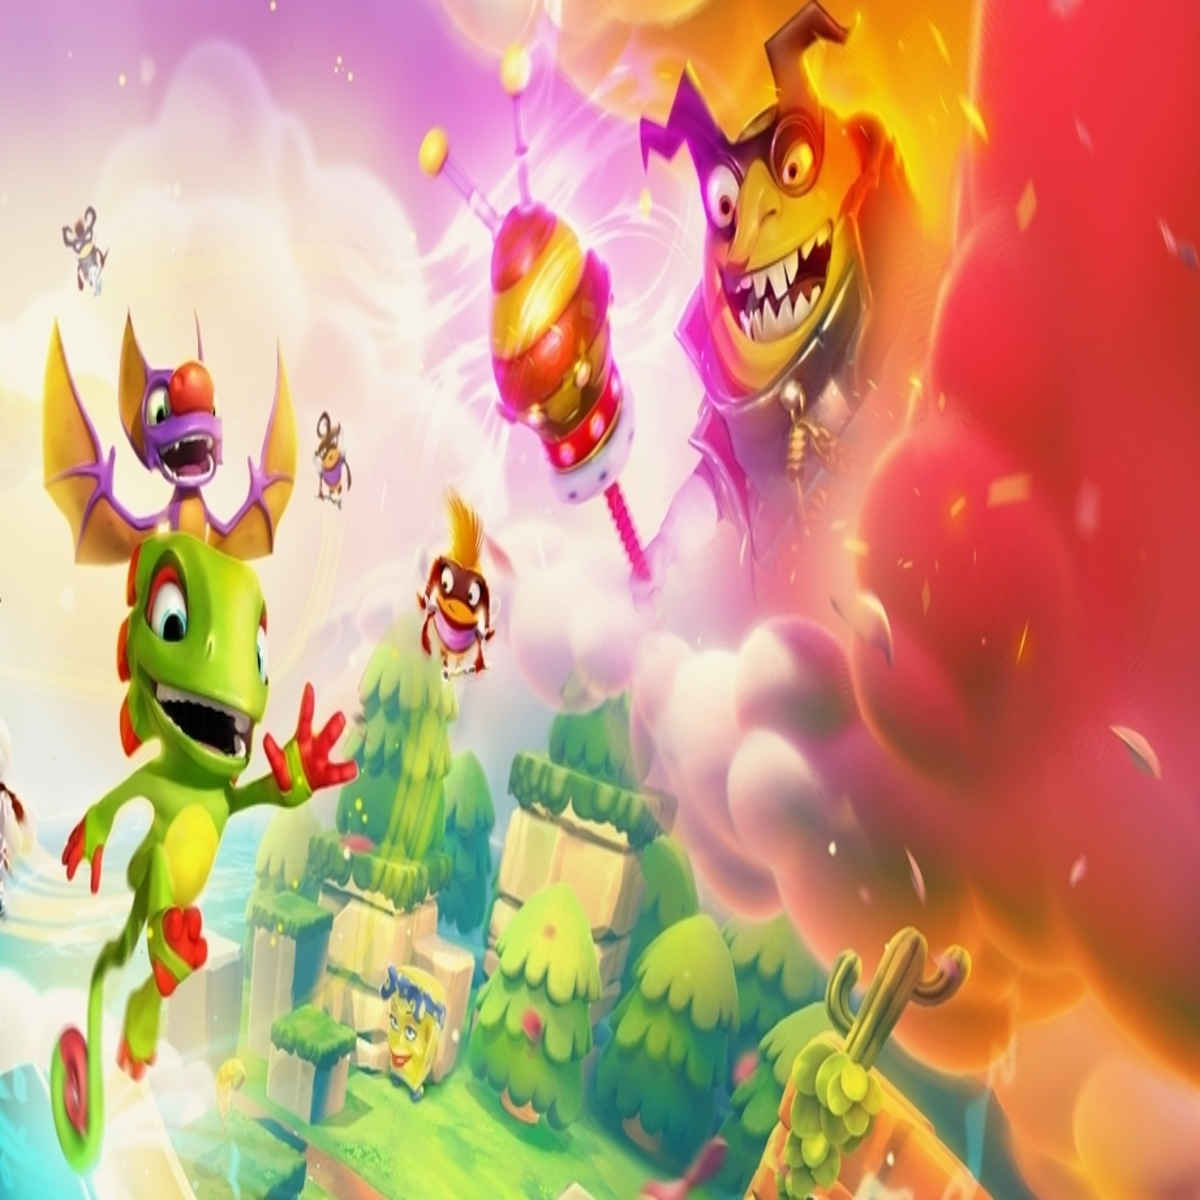 Yooka-Laylee and the comes Impossible and PC to month next consoles Lair